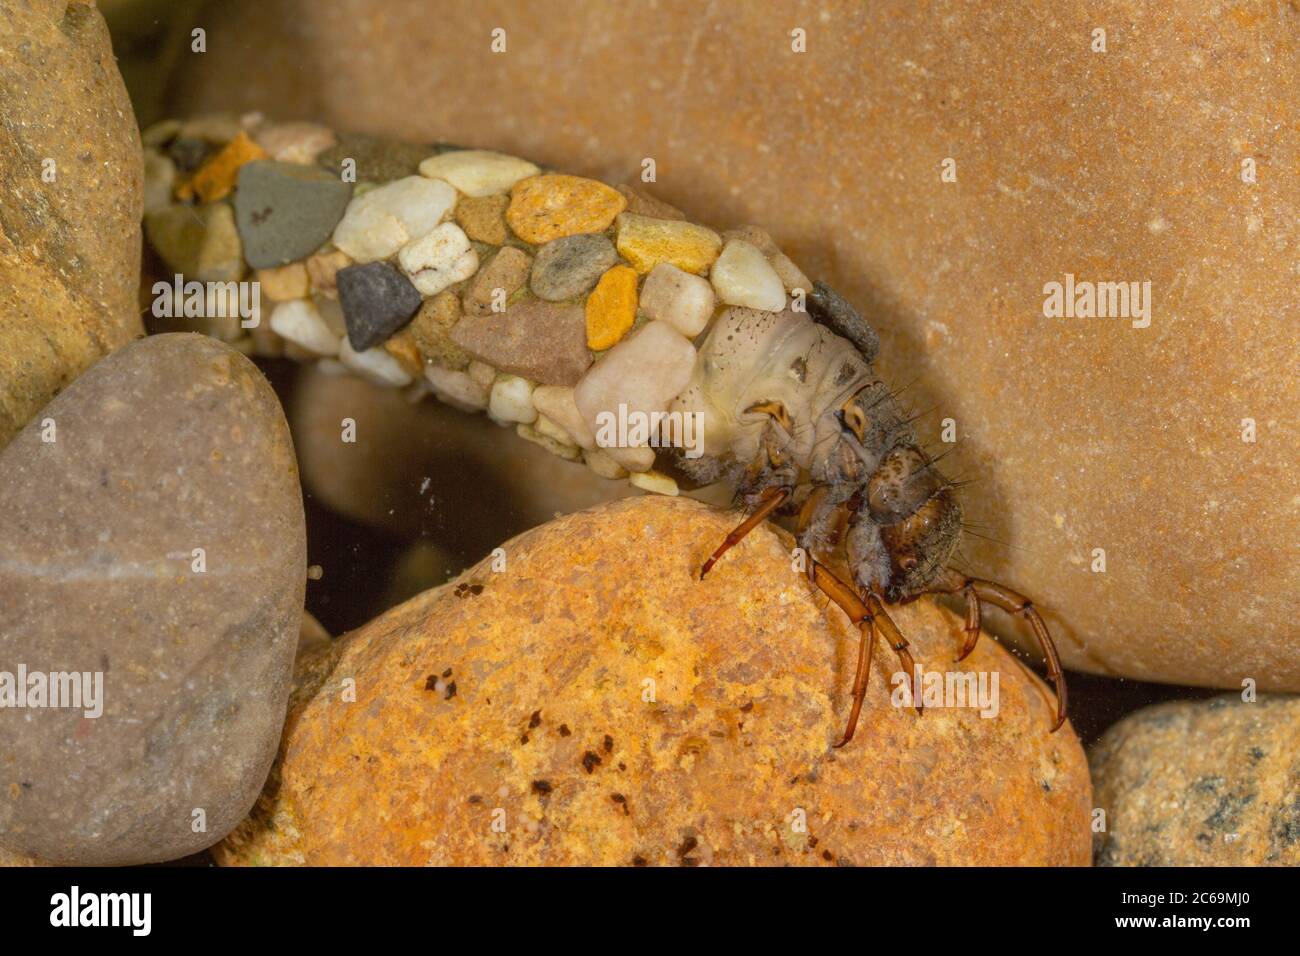 caddis flies (Trichoptera), on pebbles with case made from small stones, Germany Stock Photo